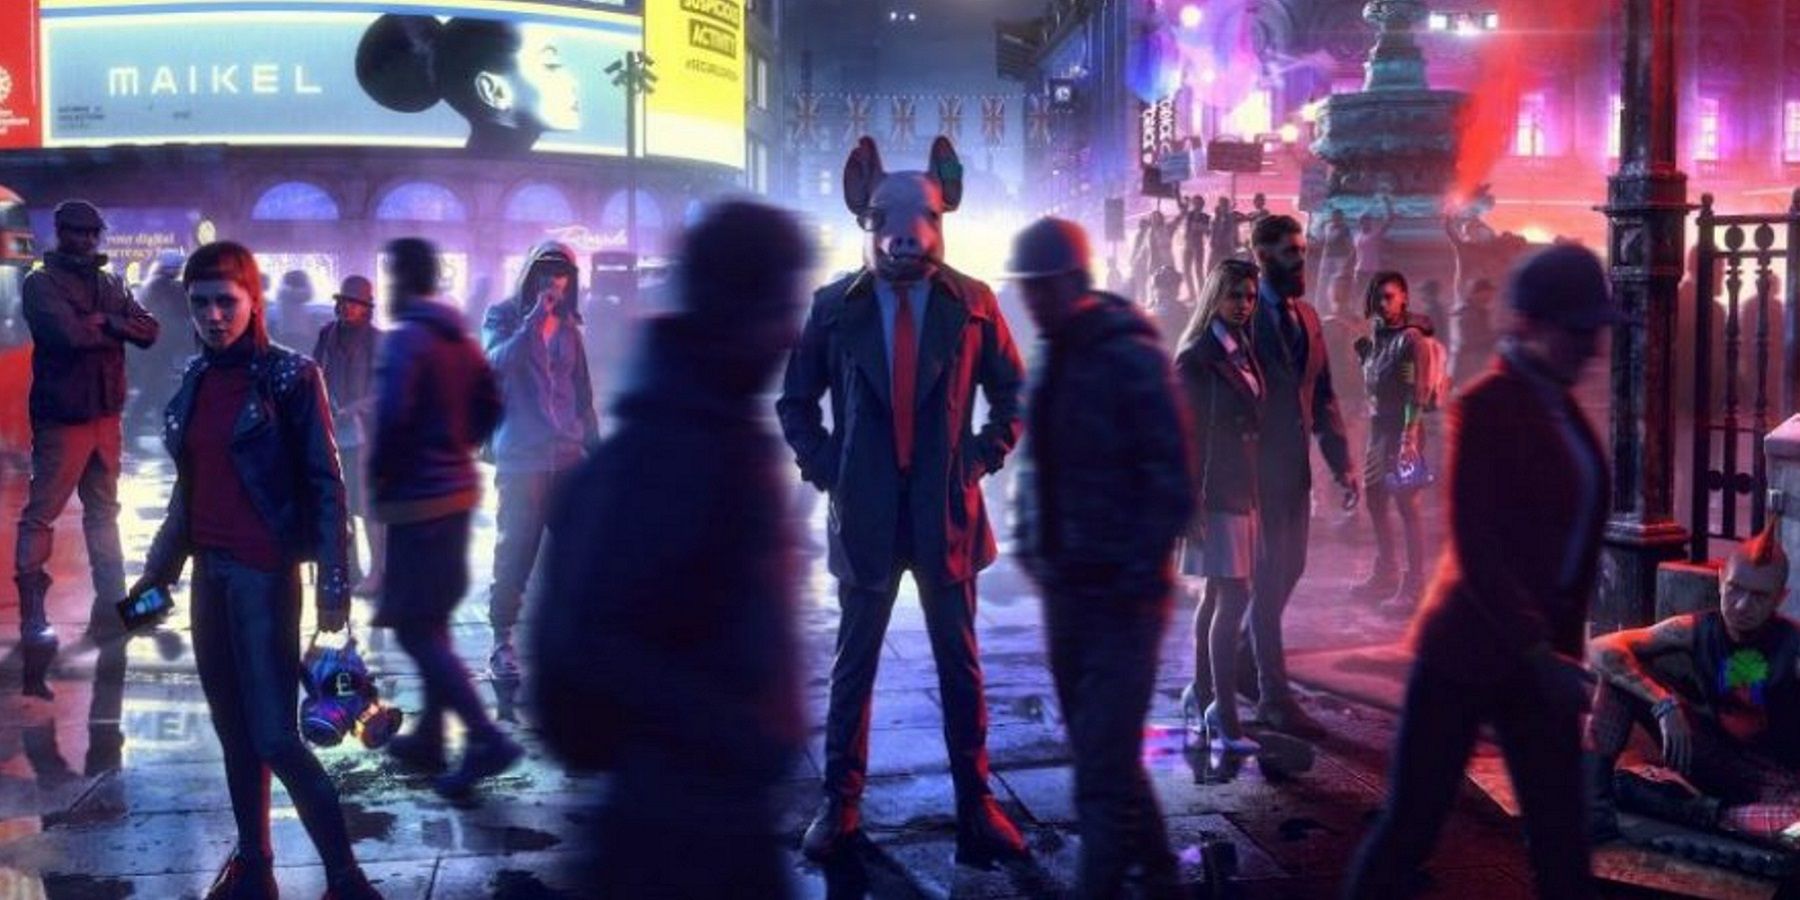 Image from Watch Dogs Legion showing a man wearing a suit and pig mask standing in a crowd.